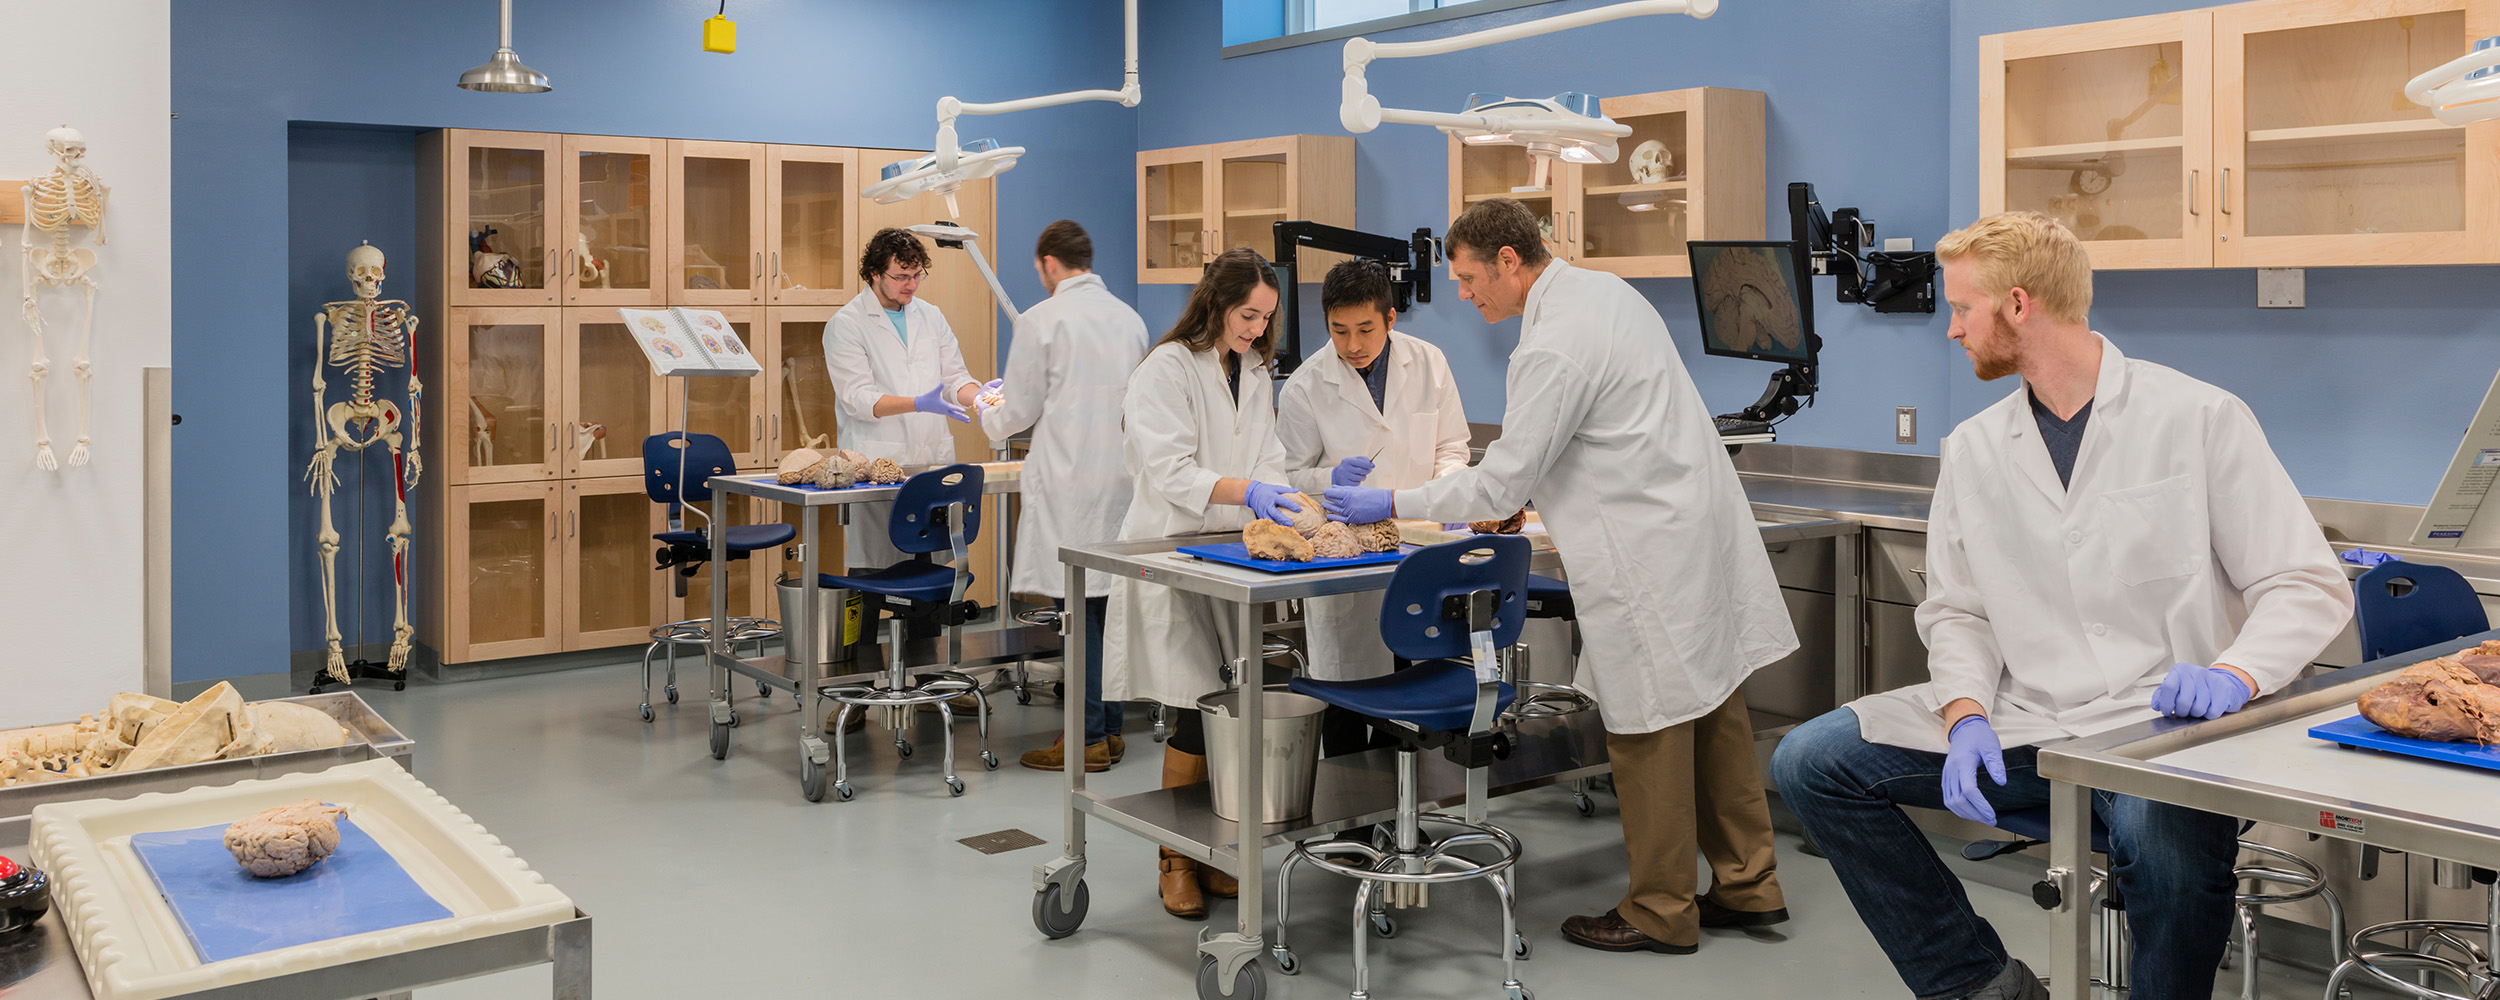 students performing dissection in anatomy lab